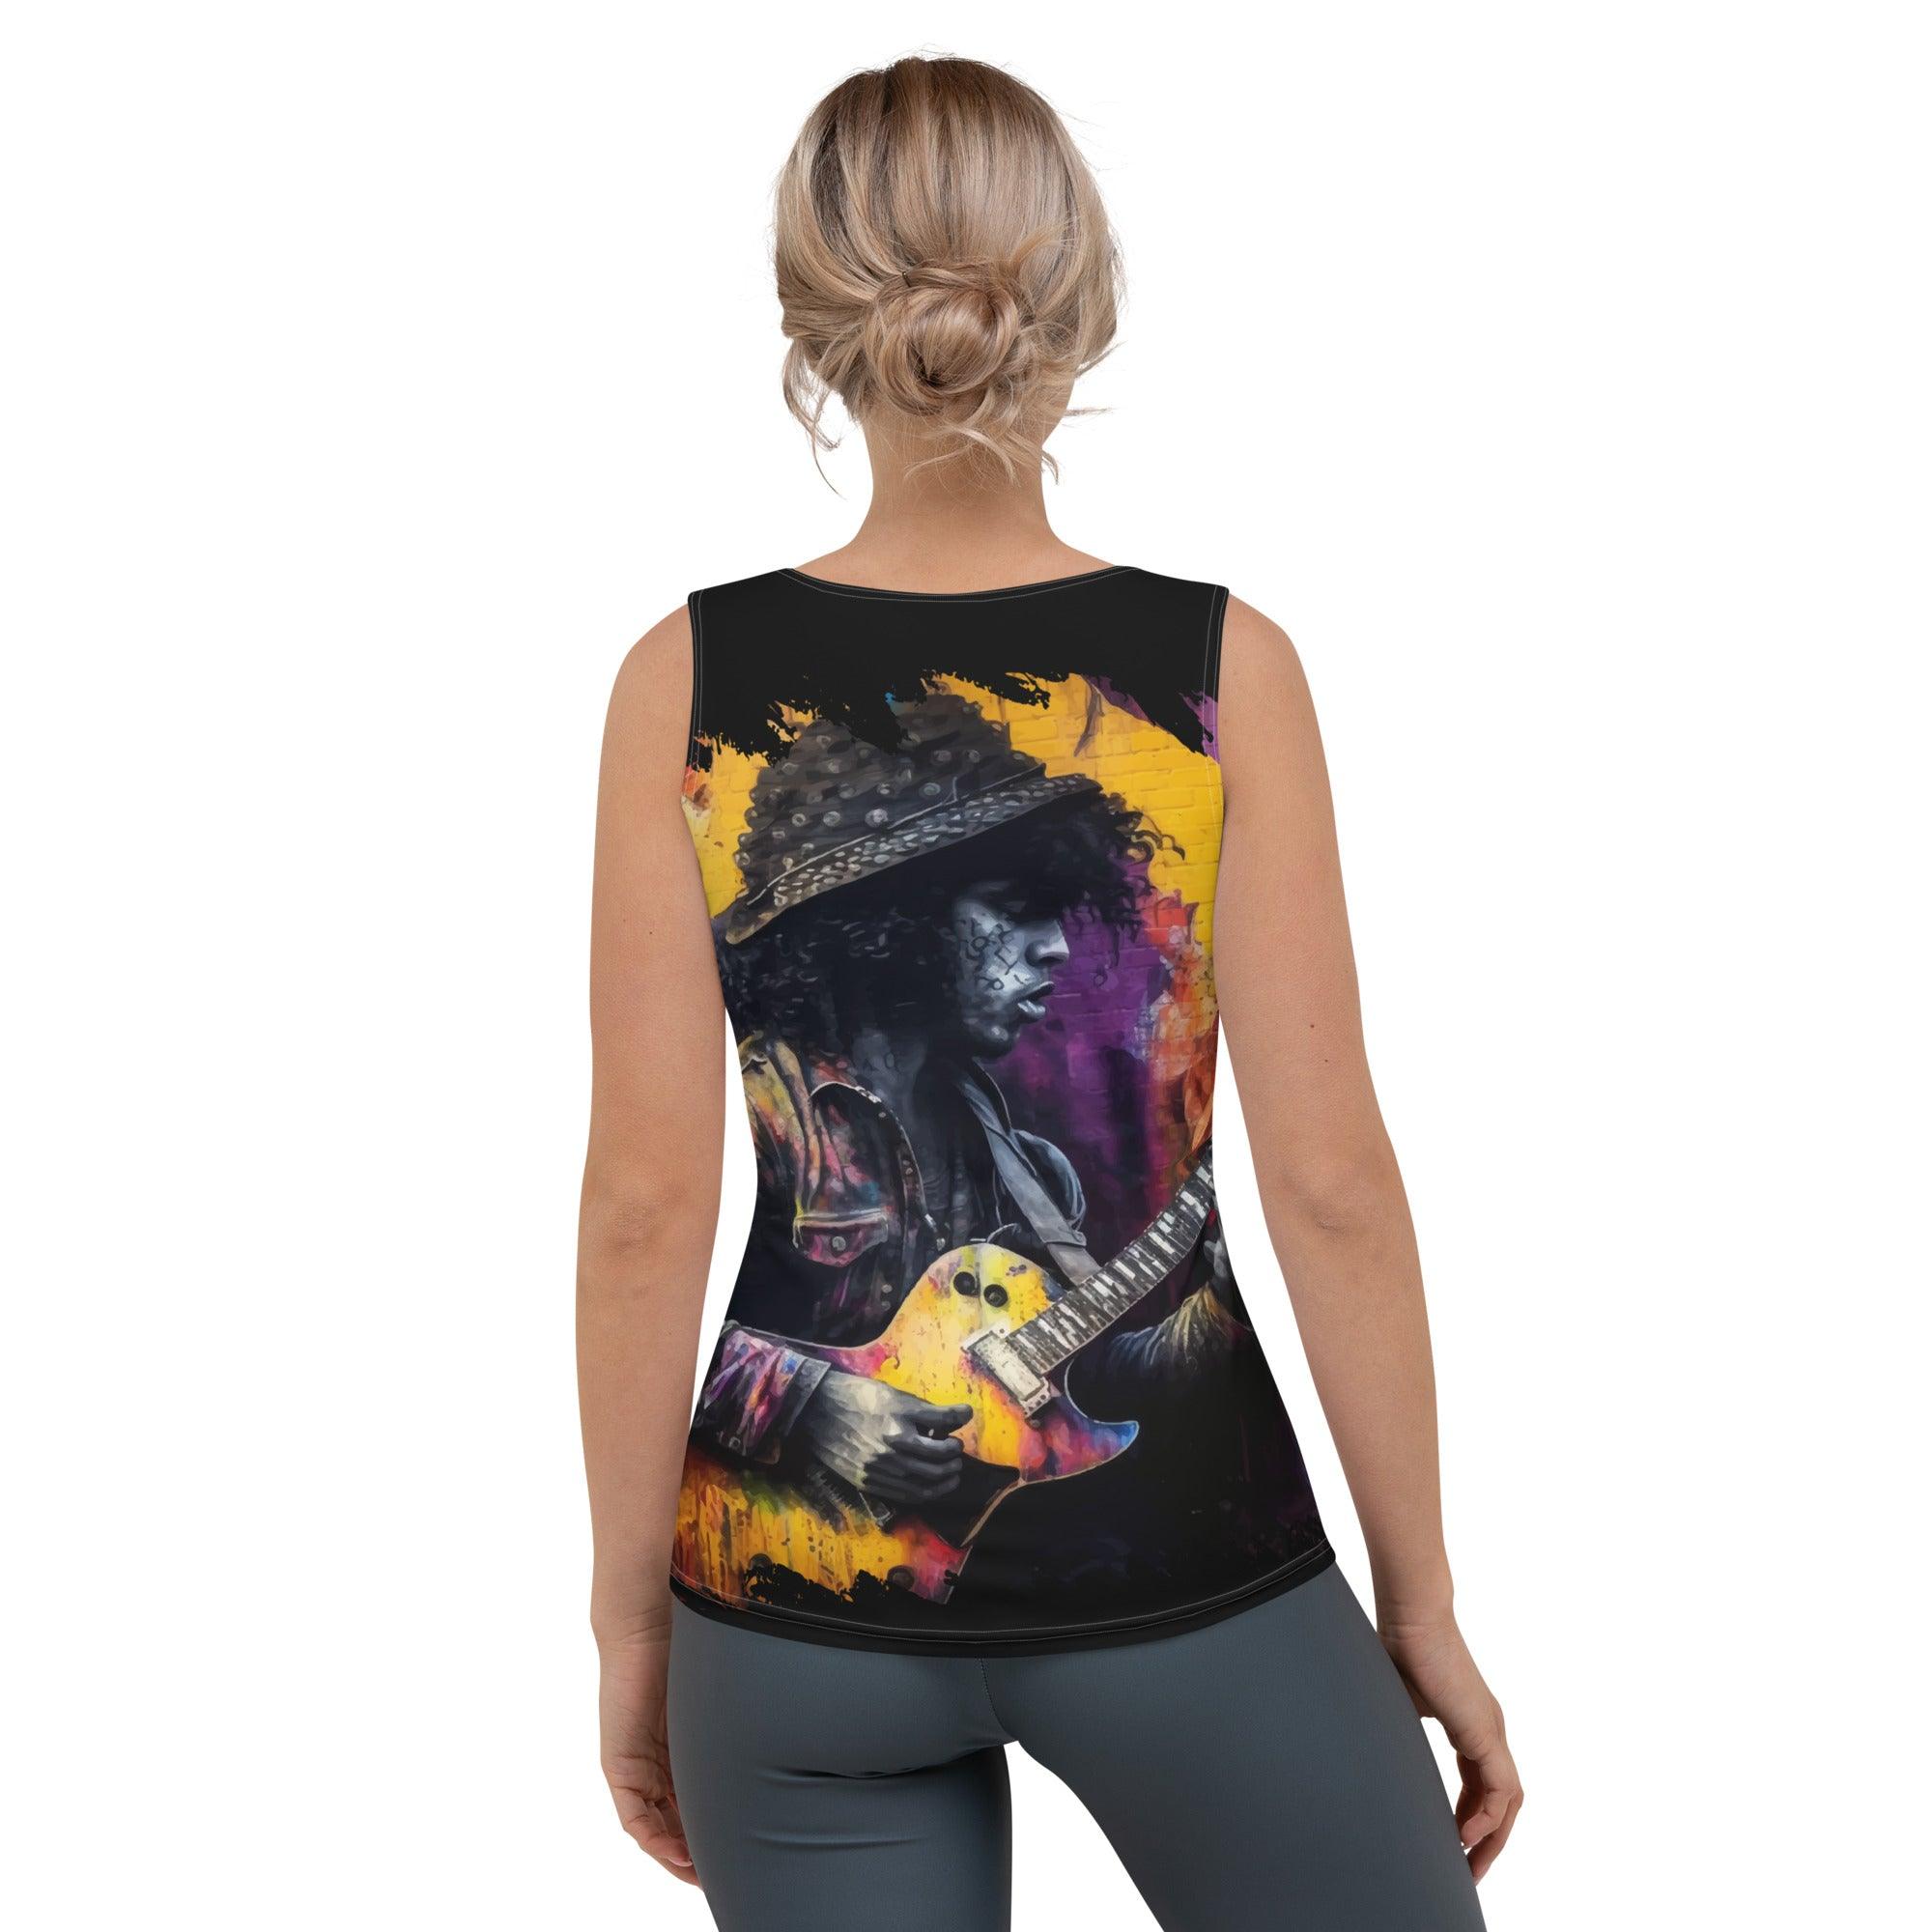 Strings Tell His Story Sublimation Cut & Sew Tank Top - Beyond T-shirts